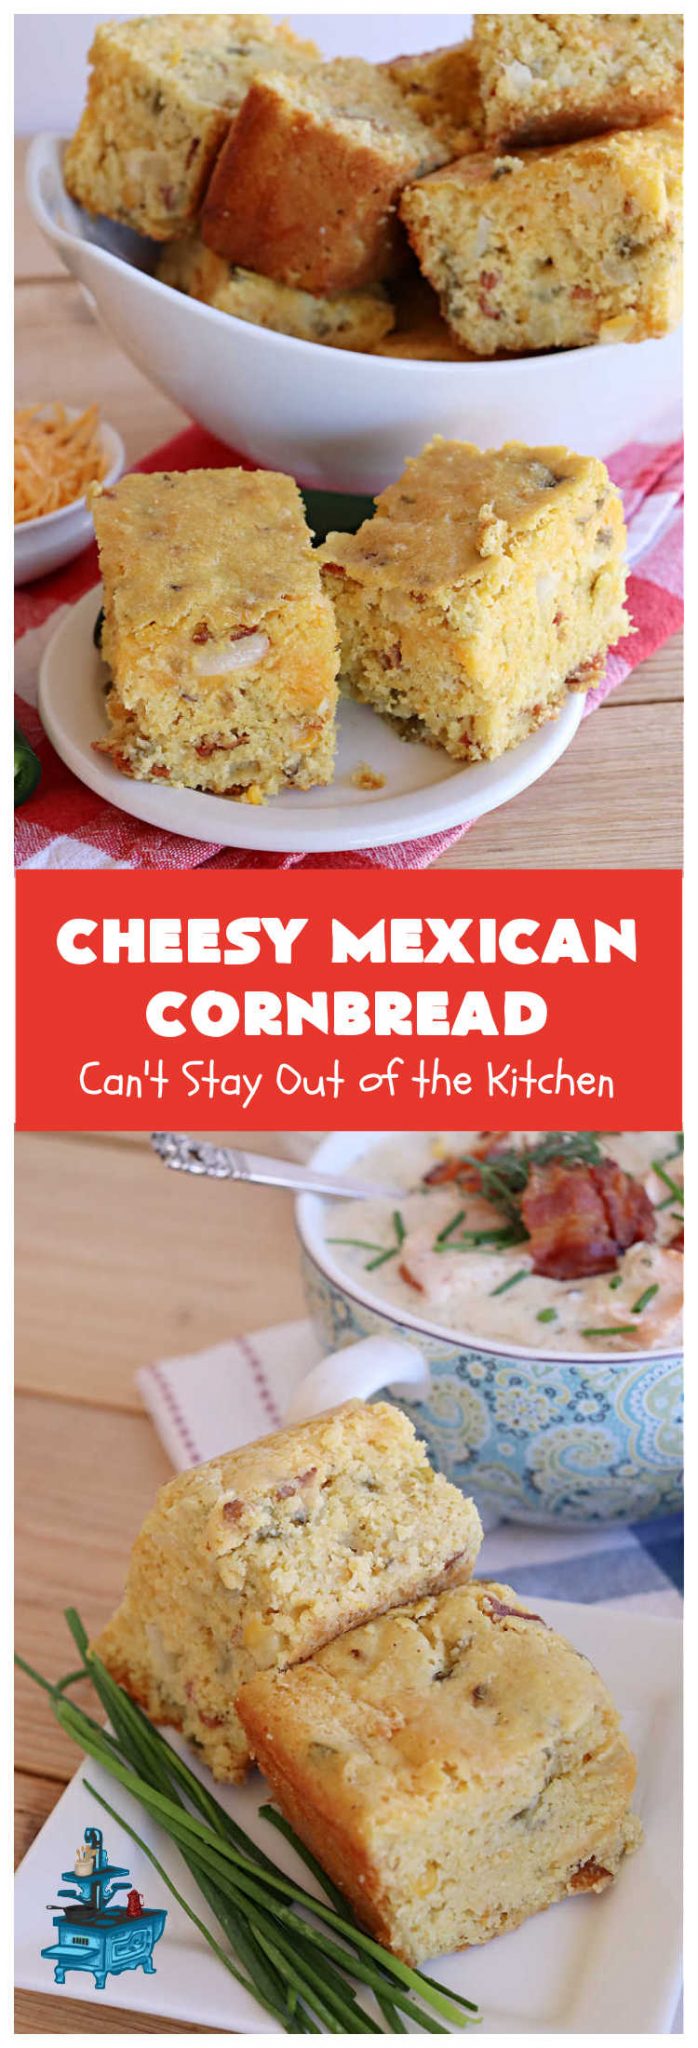 Cheesy Mexican Cornbread – Can't Stay Out of the Kitchen